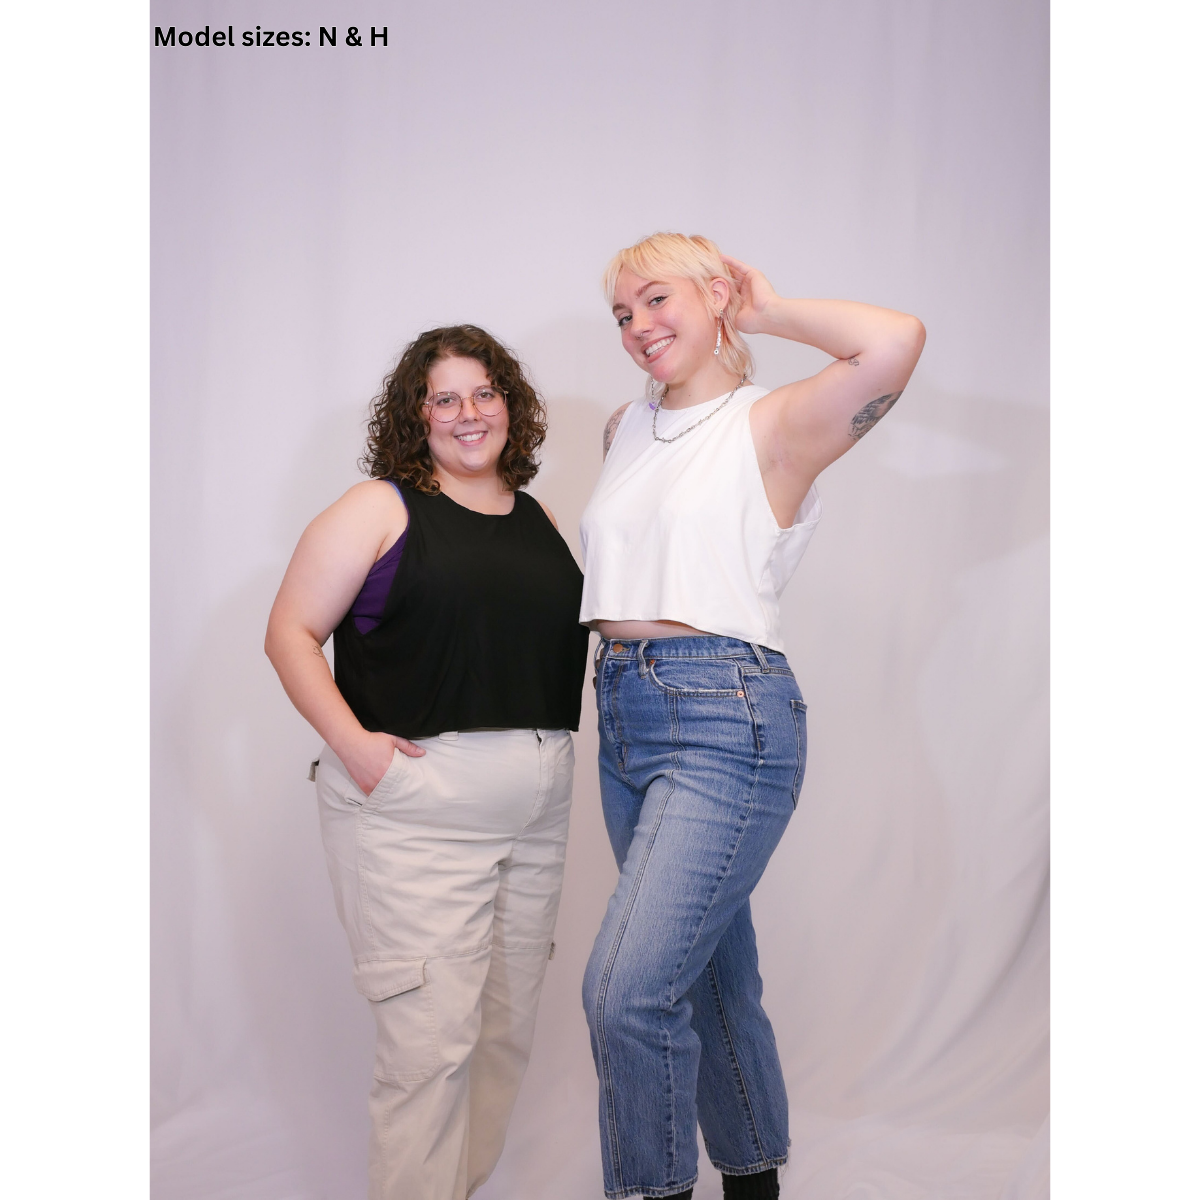 A photo of 2 people. One wearing a black sleeveless crop top (Size N) with beige pants, and the other wearing a sleeveless crop top (size H) with jeans.